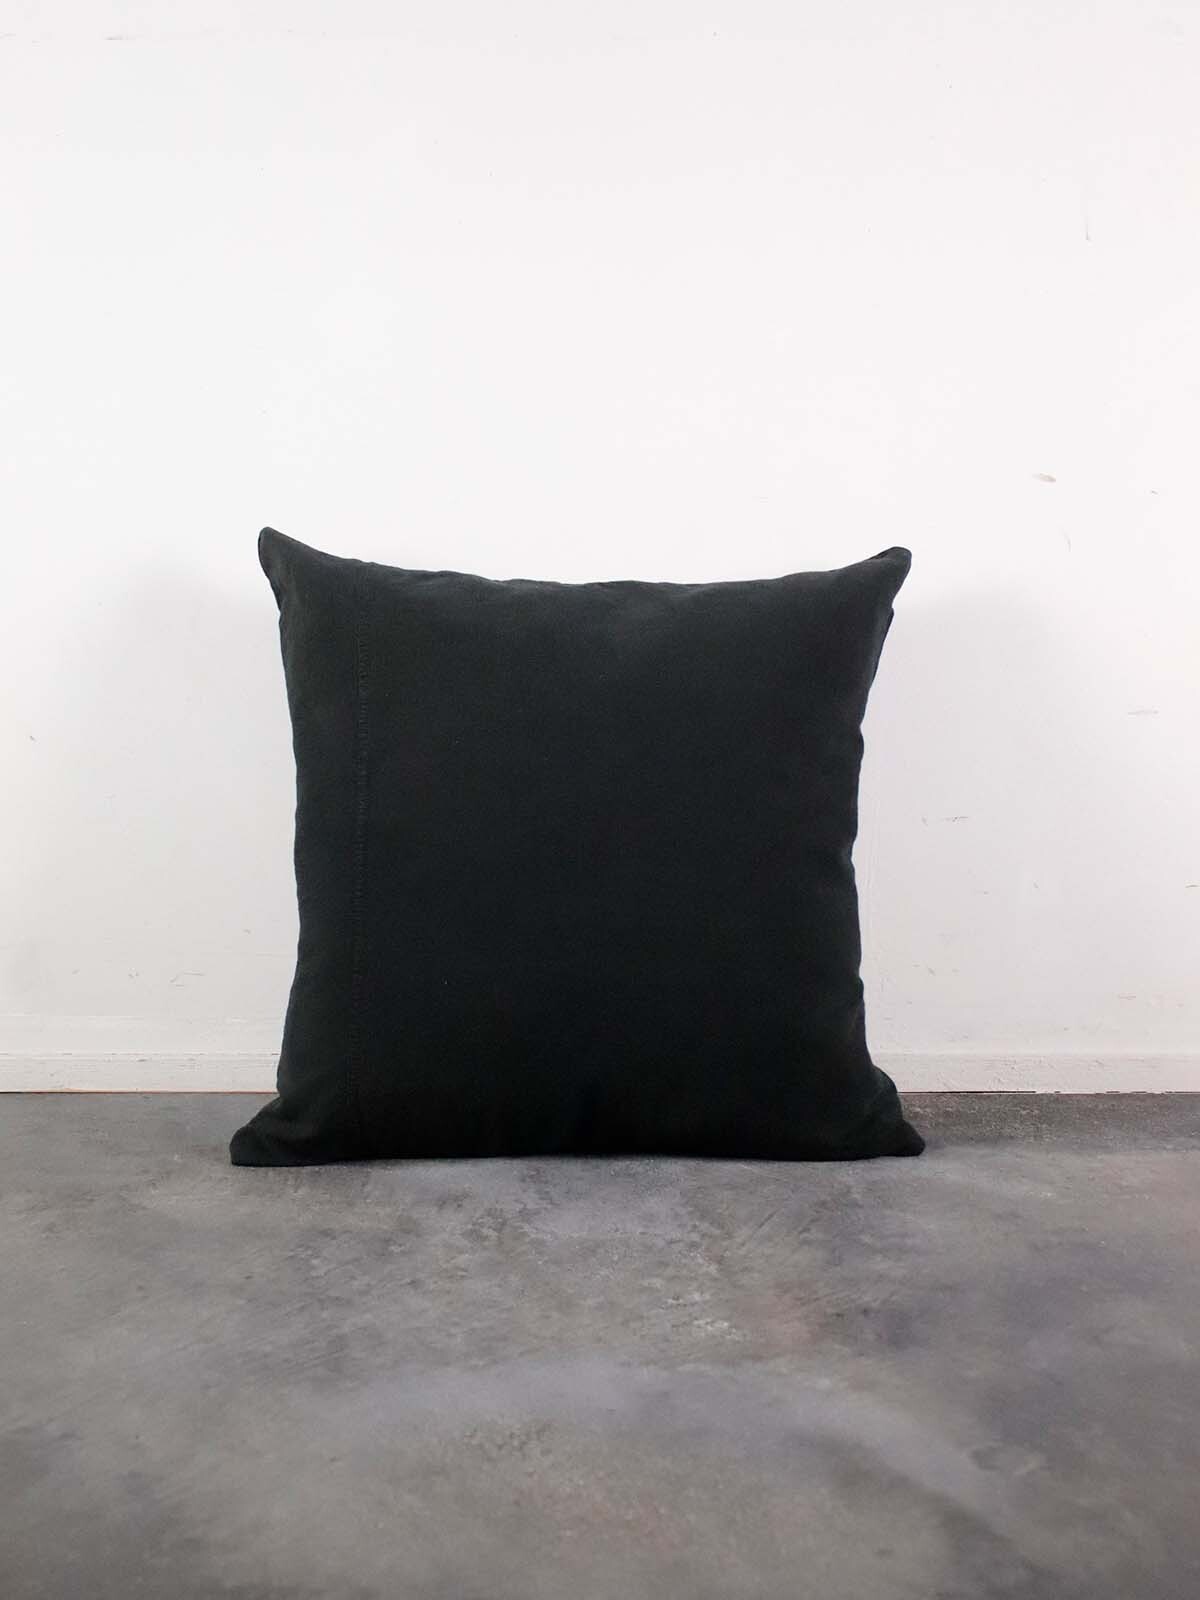 black dyed linen,vintage,french linen,cushion,BROWN,remake